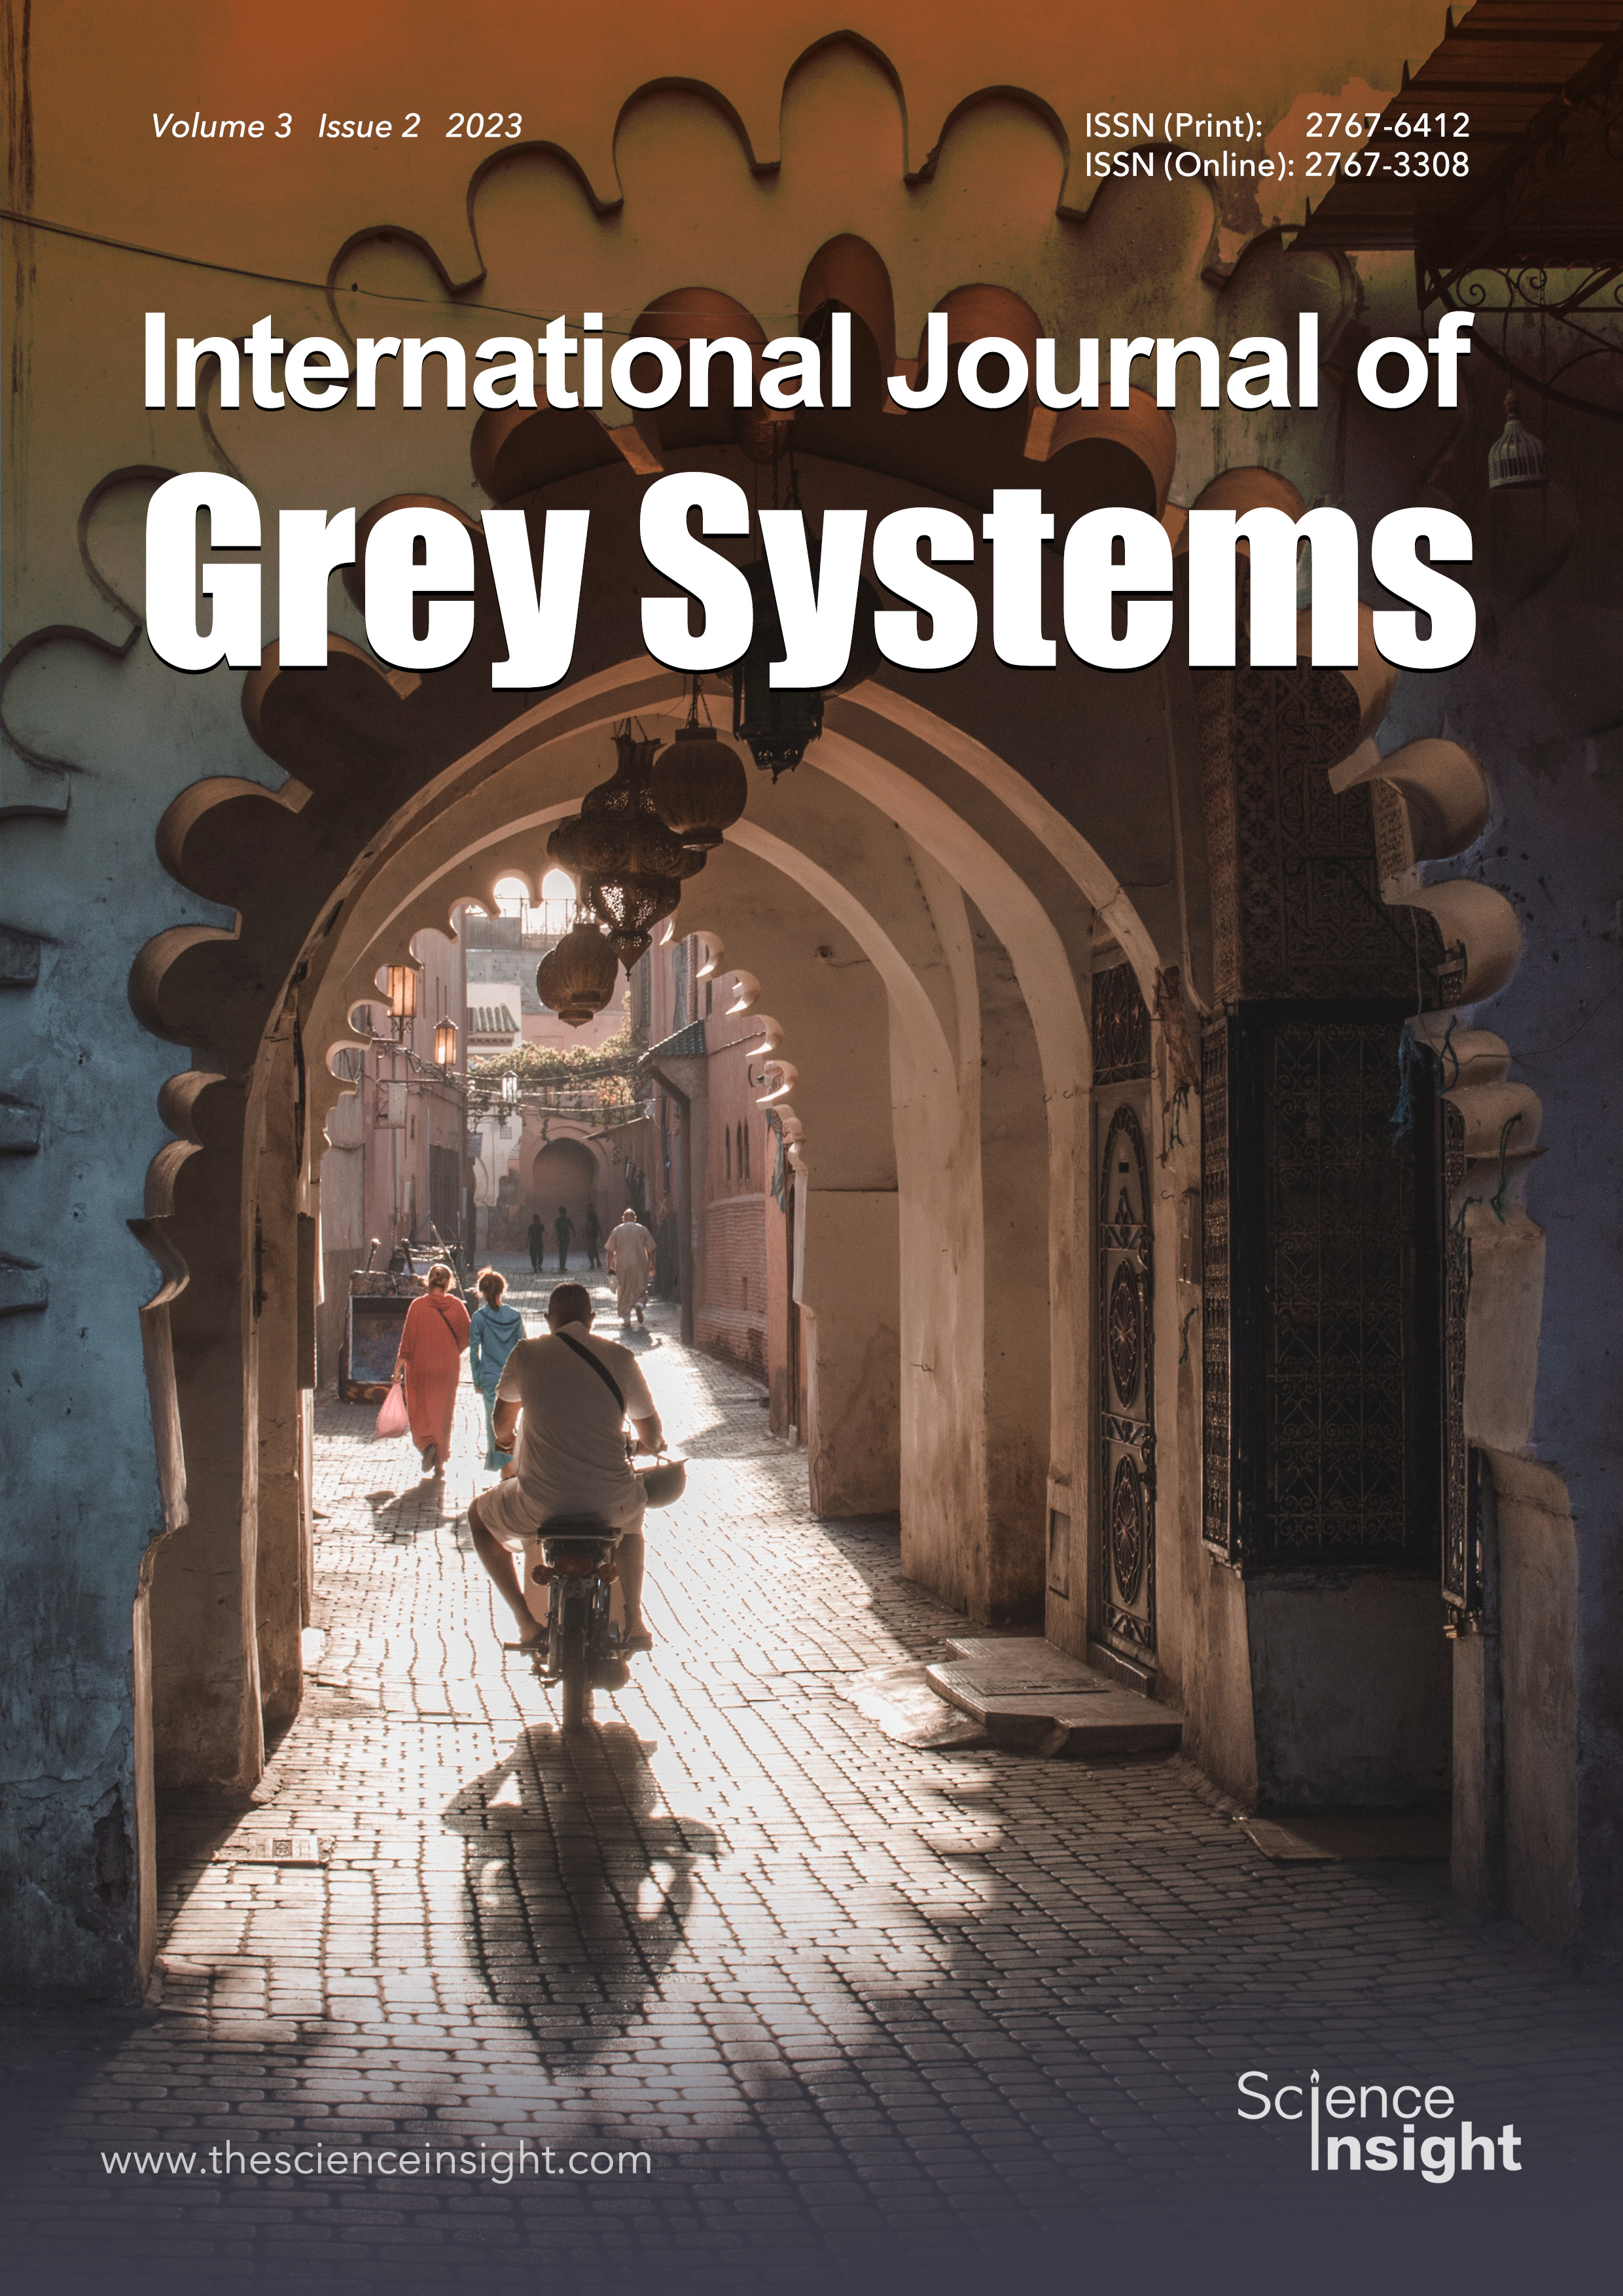 International Journal of Grey Systems, Volume 3, Issue 2, 2023